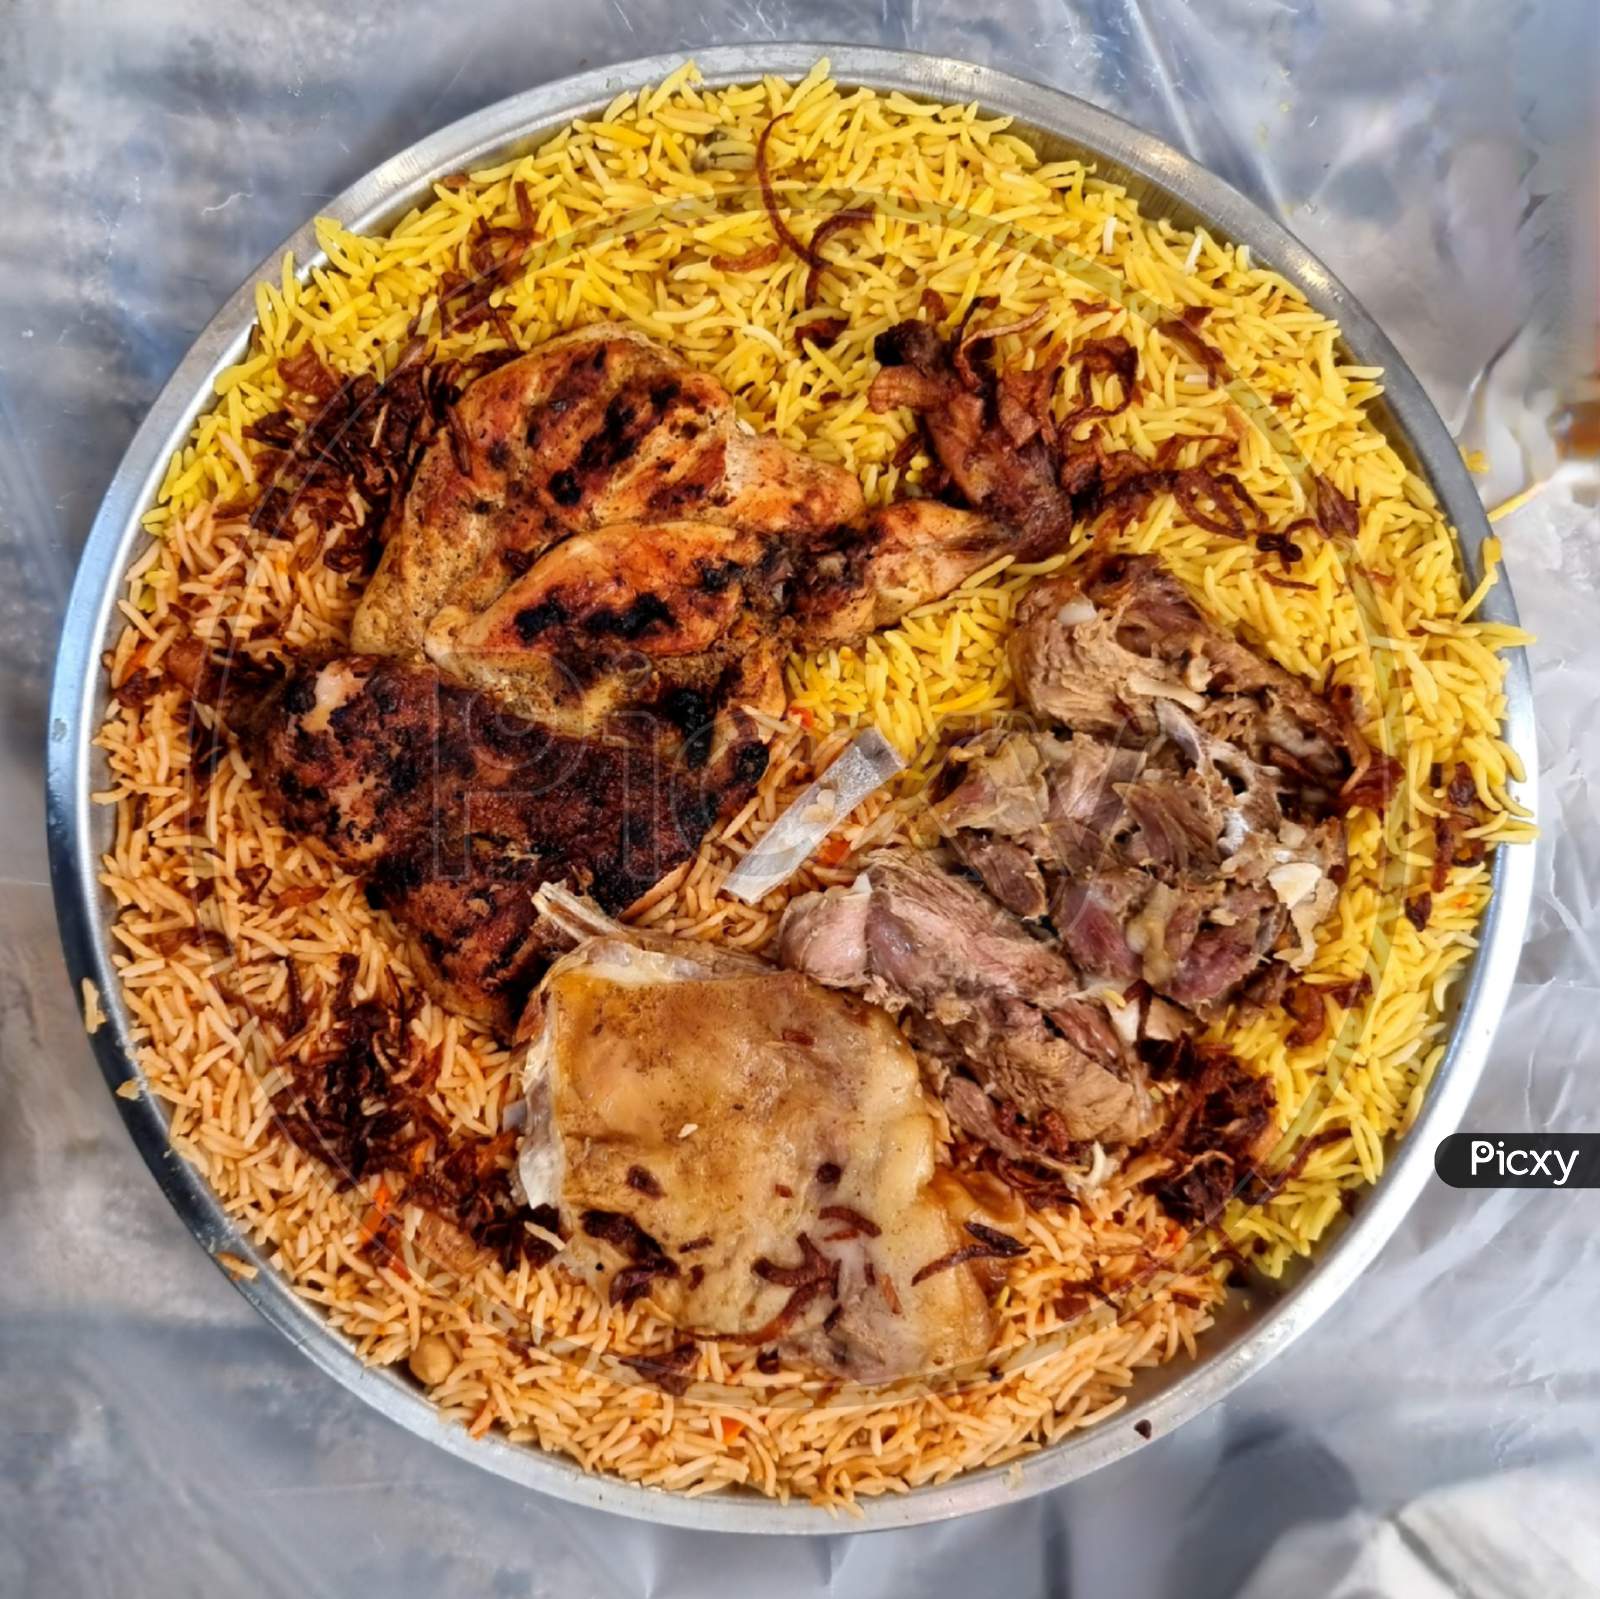 Mandi and Kabsa Rice with Grilled Chicken and Mutton Meat.